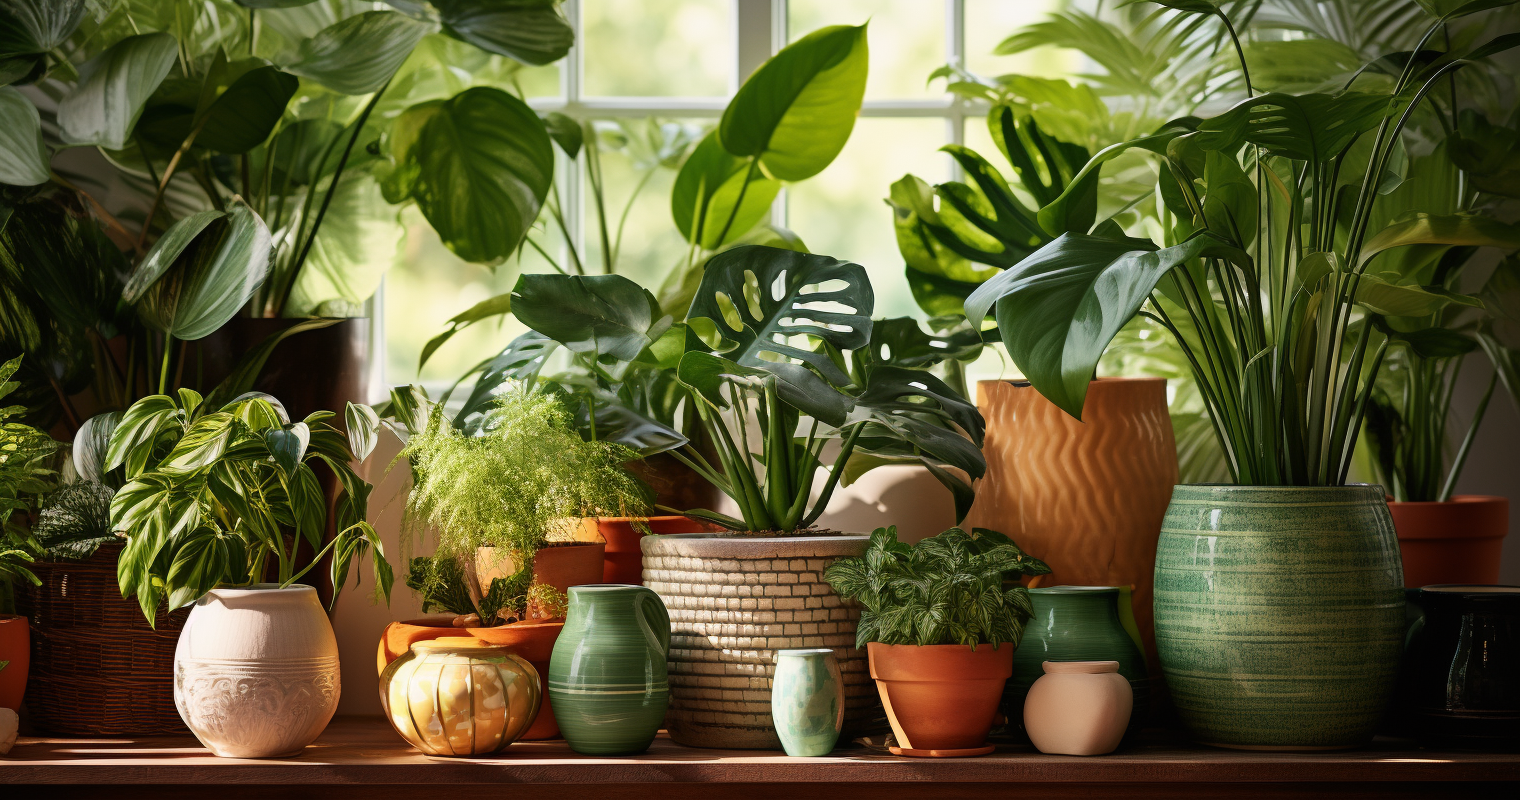 Houseplants transitioning outdoors